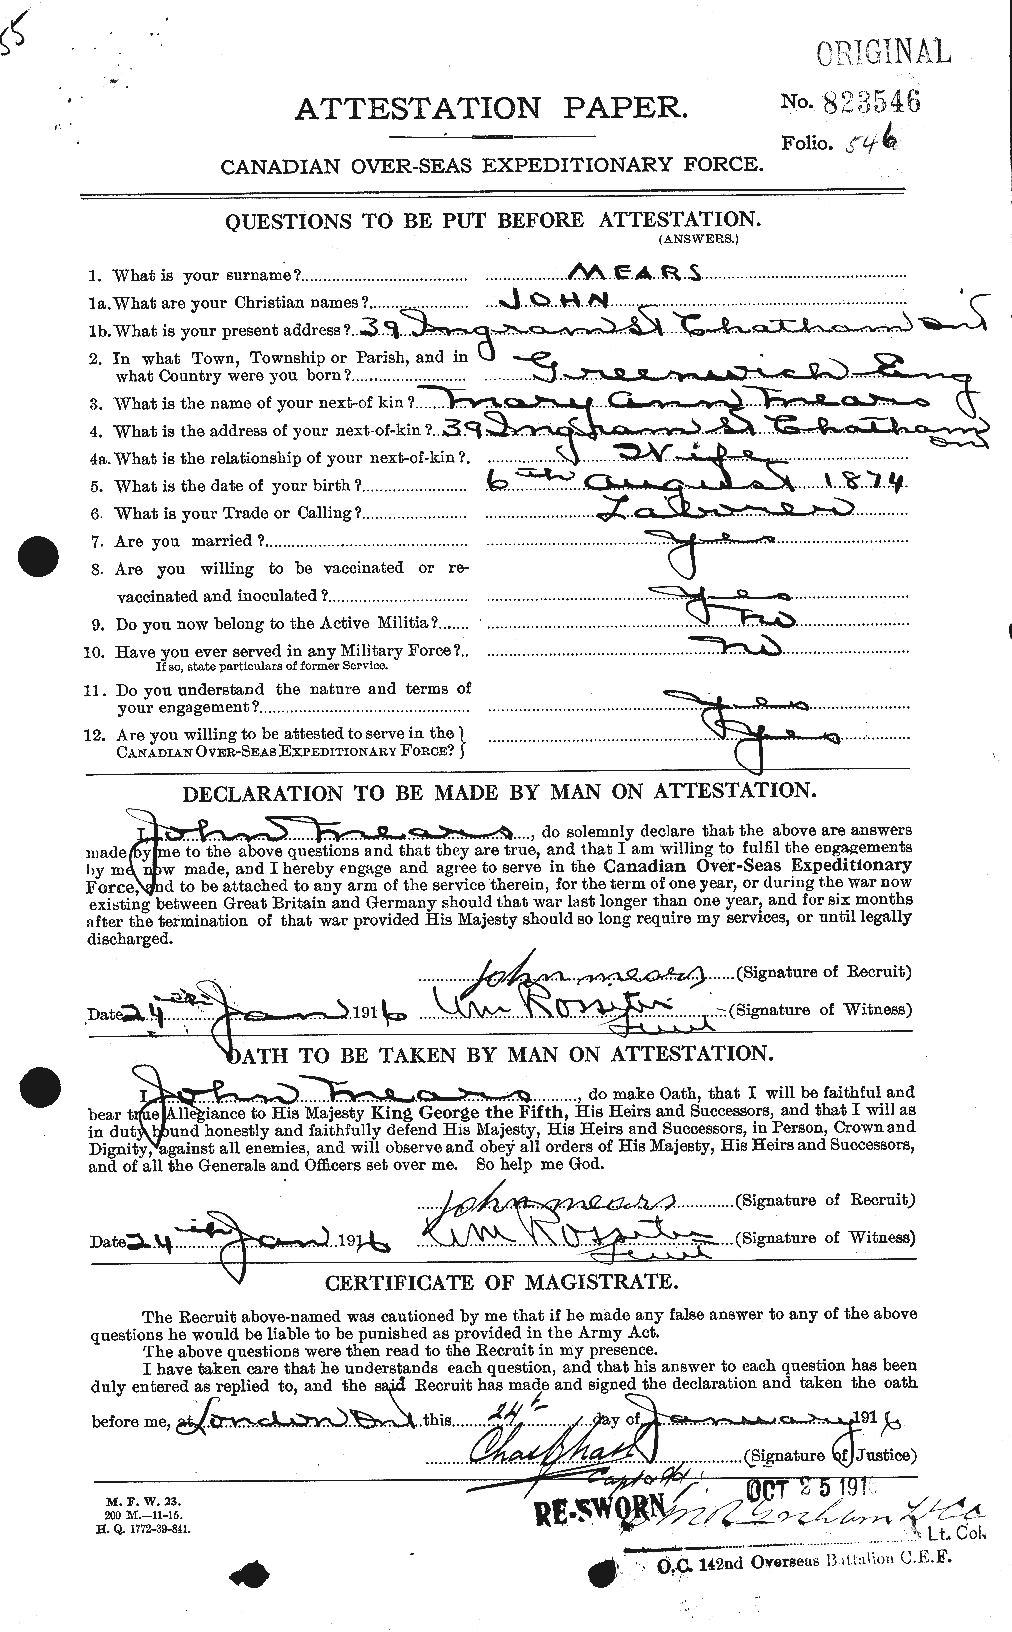 Personnel Records of the First World War - CEF 489699a